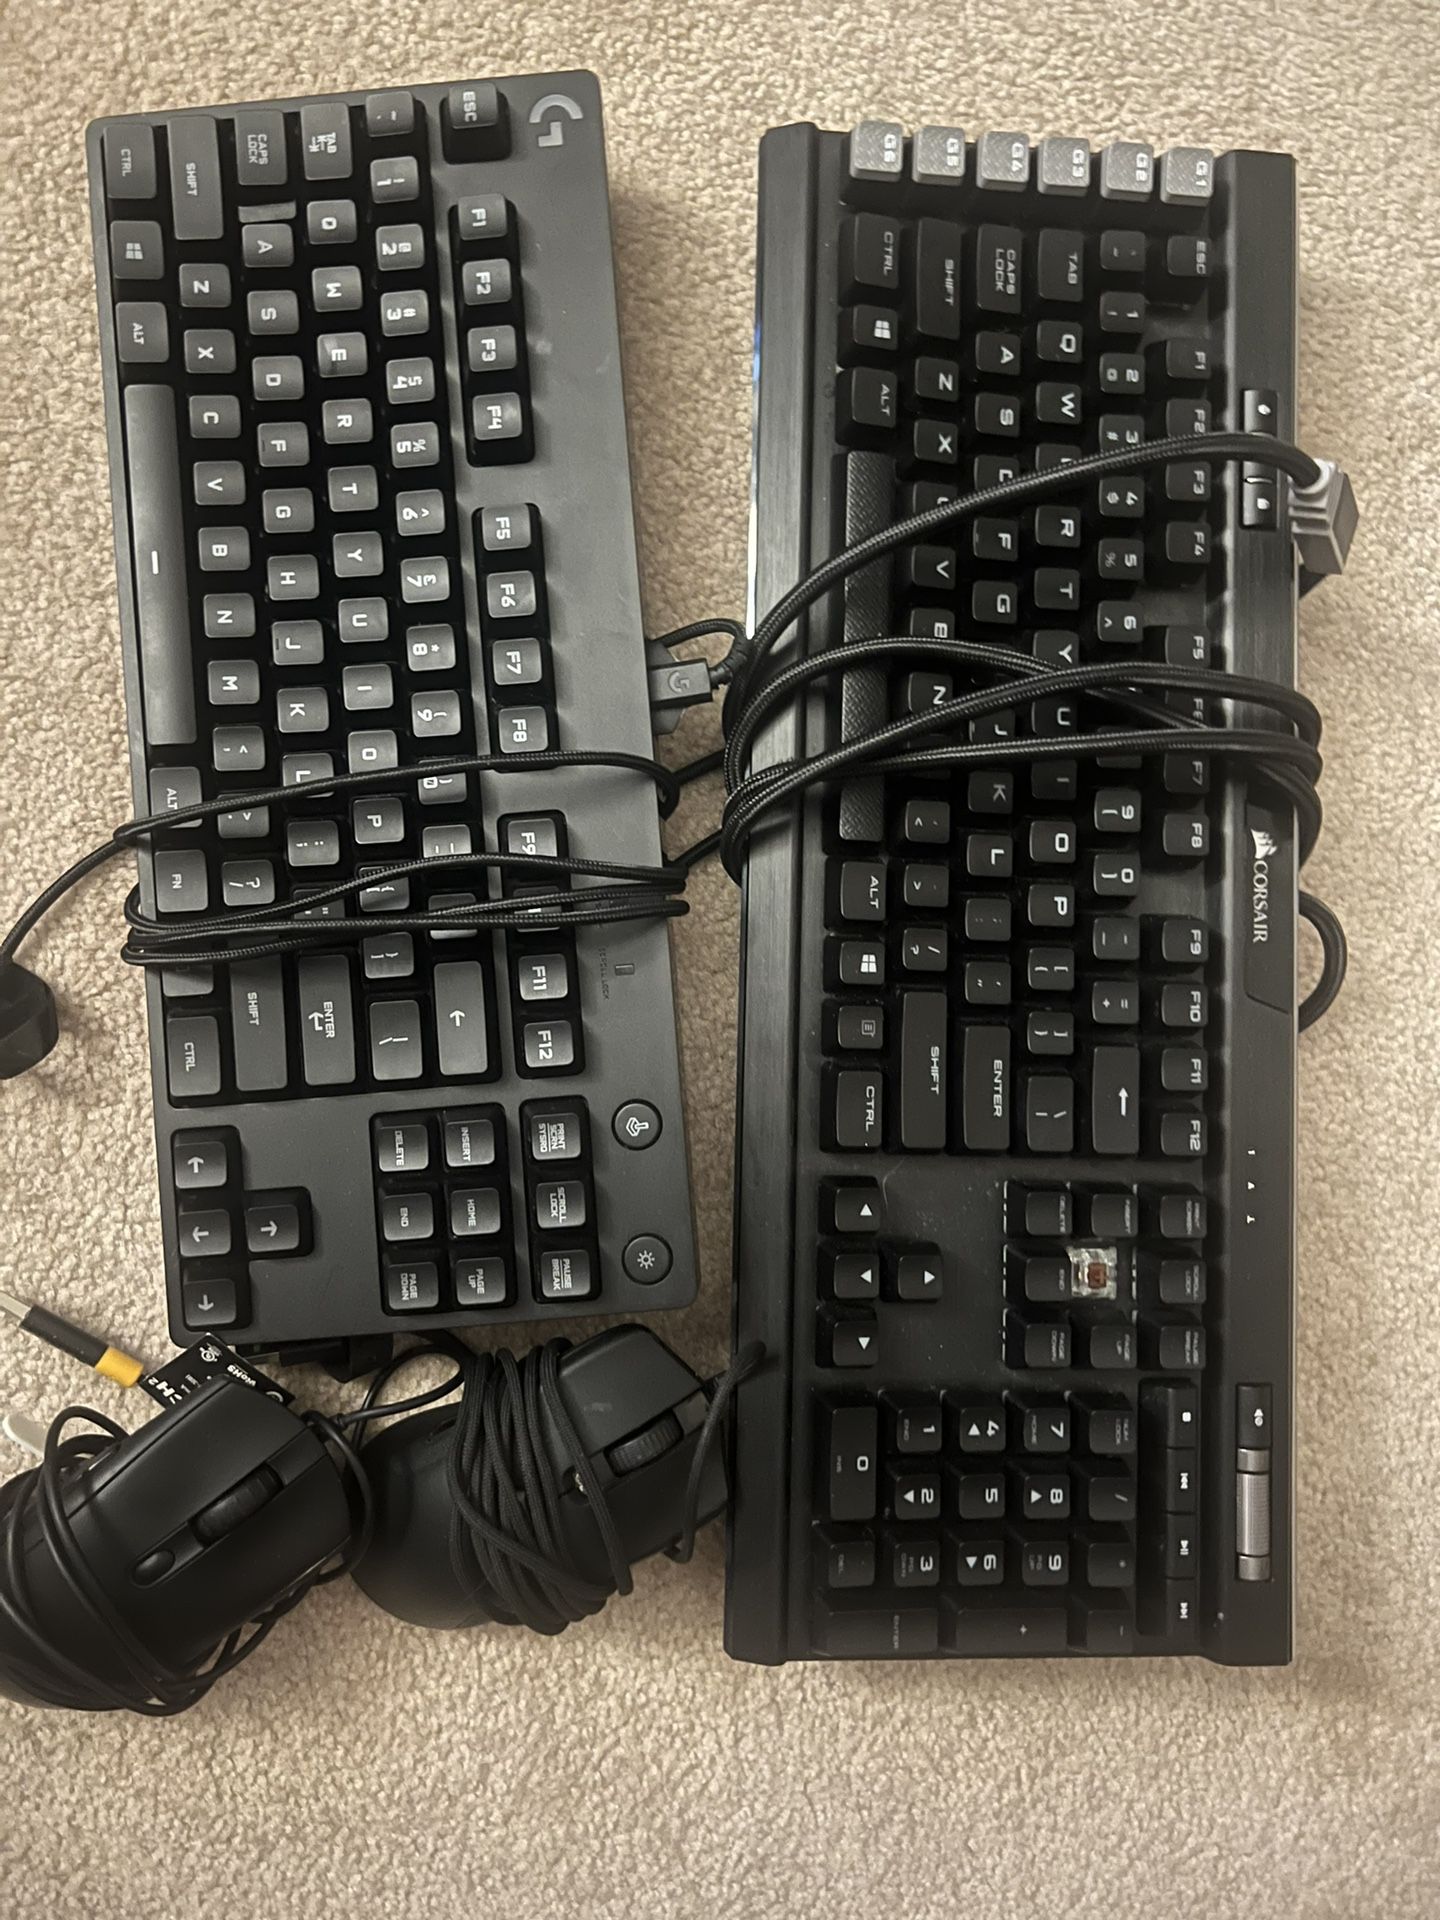 2 Used Gaming Keyboards And Mouse